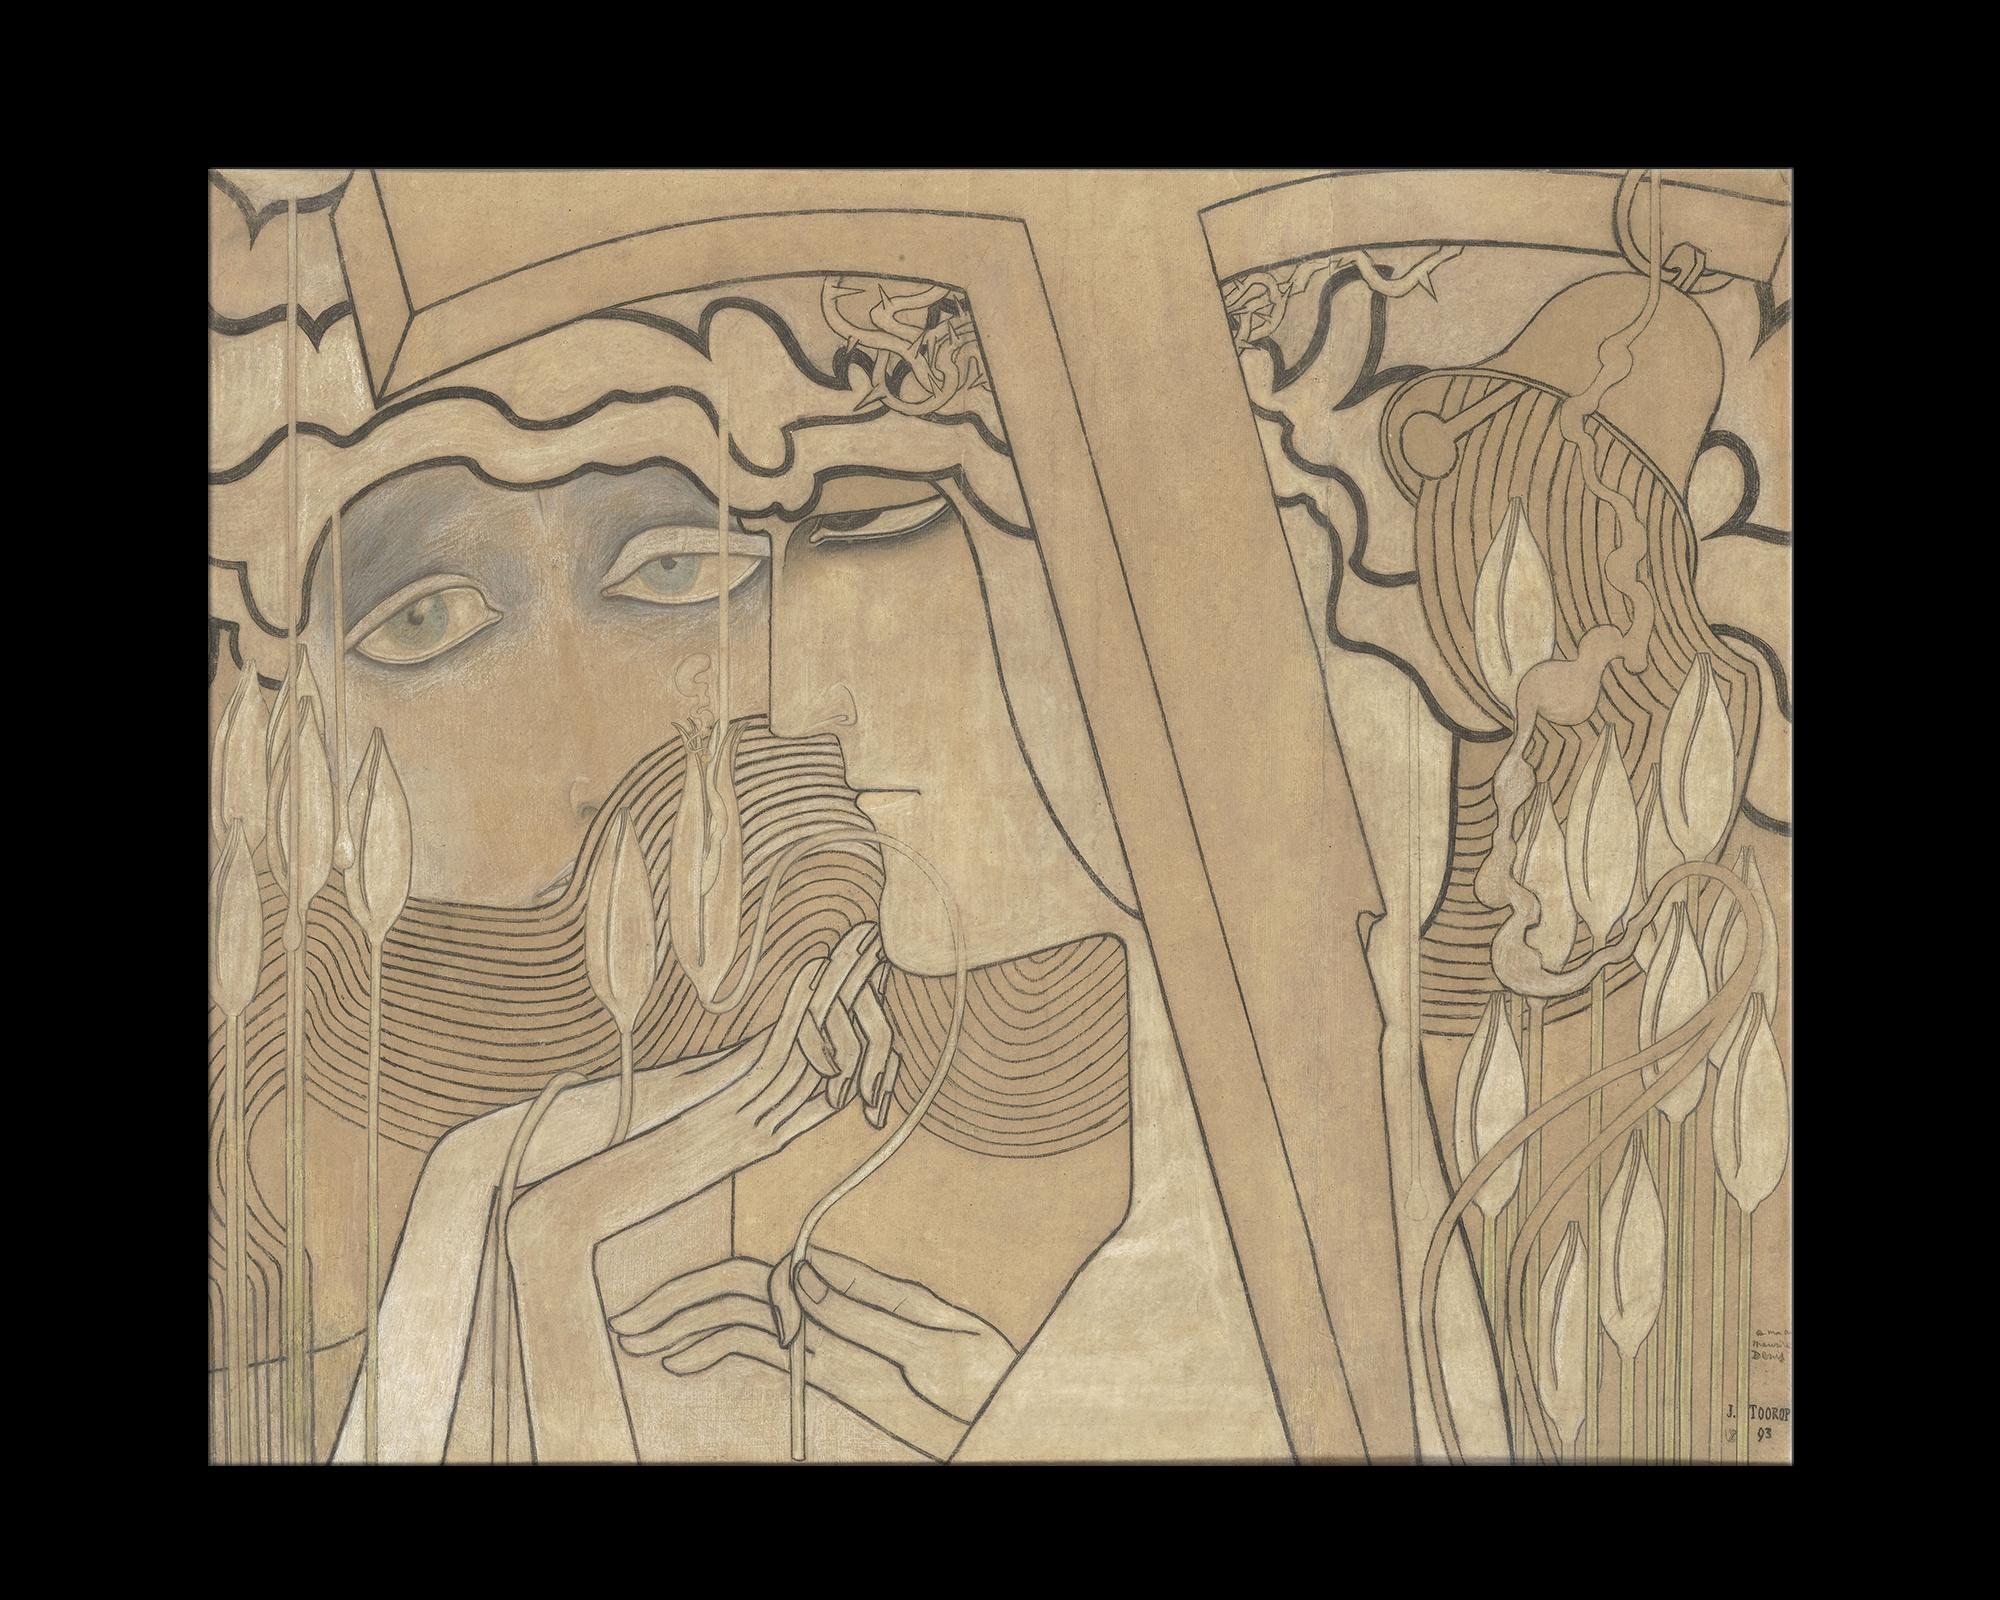 Desire and Satisfaction, after Dutch Art Deco Pastel by Jan Toorop In Excellent Condition For Sale In Fairhope, AL